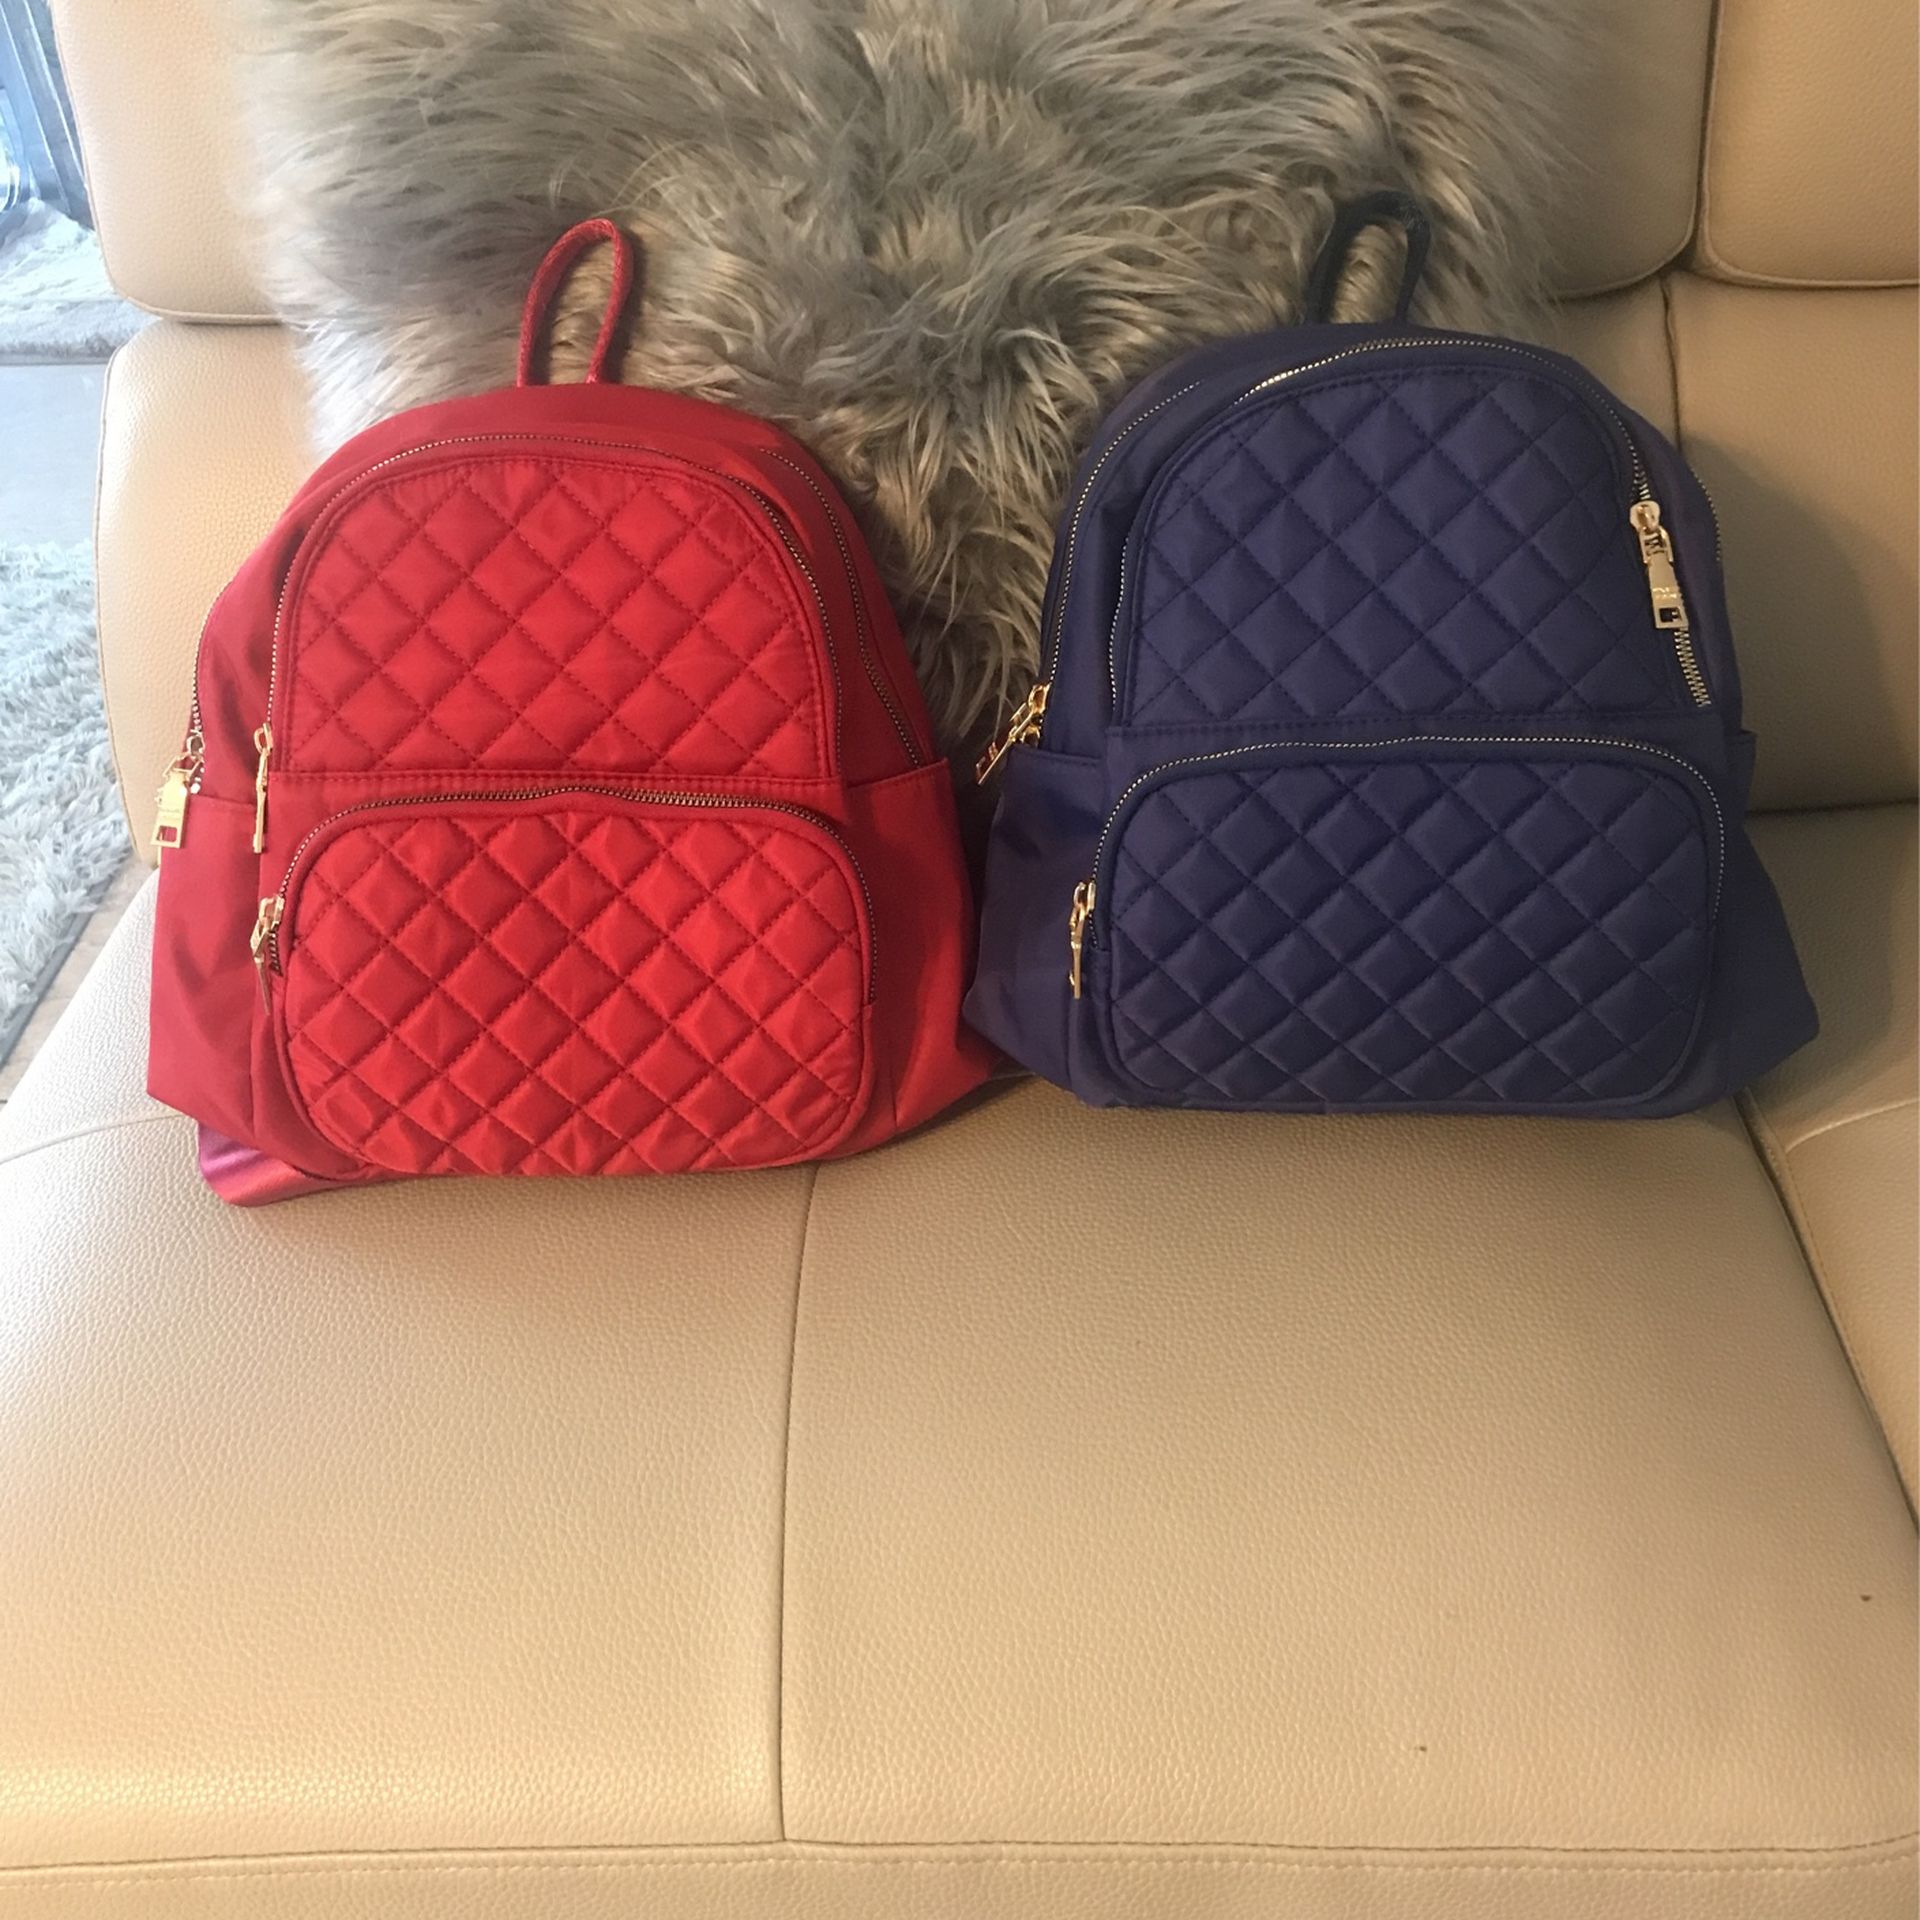 New Two Pretty Backpack For $30 